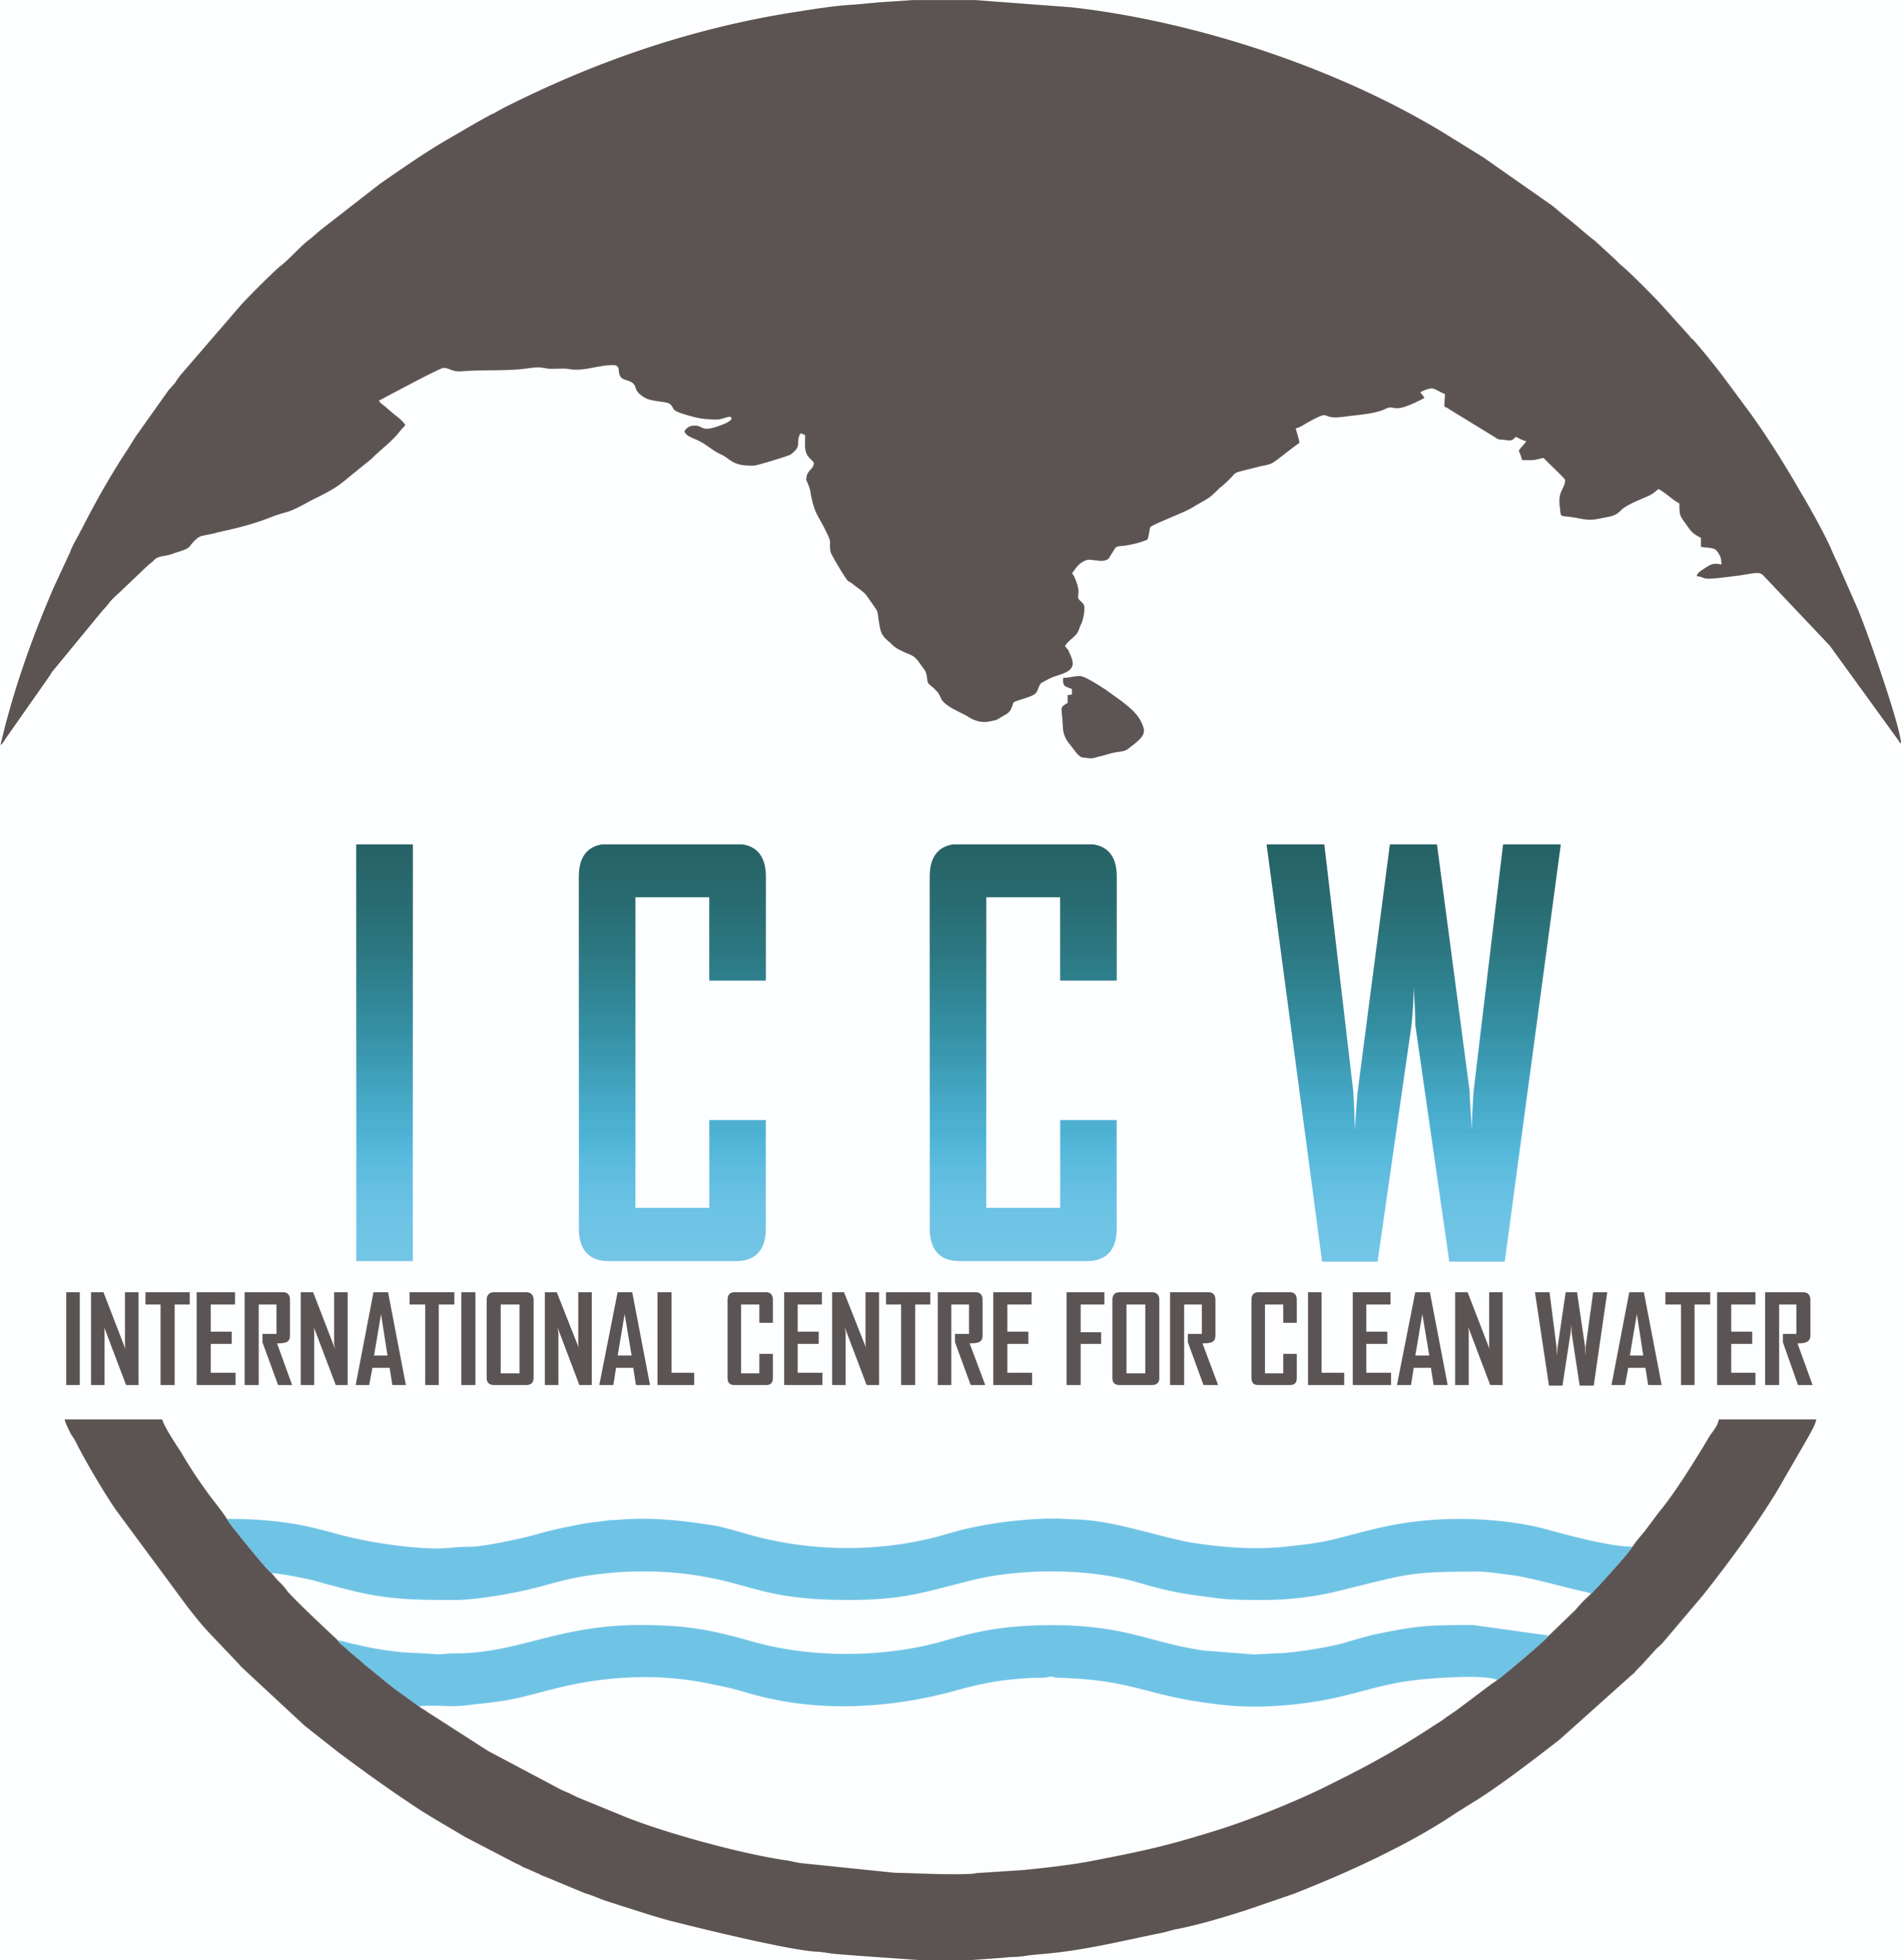 INTERNATIONAL CENTER FOR CLEAN WATER